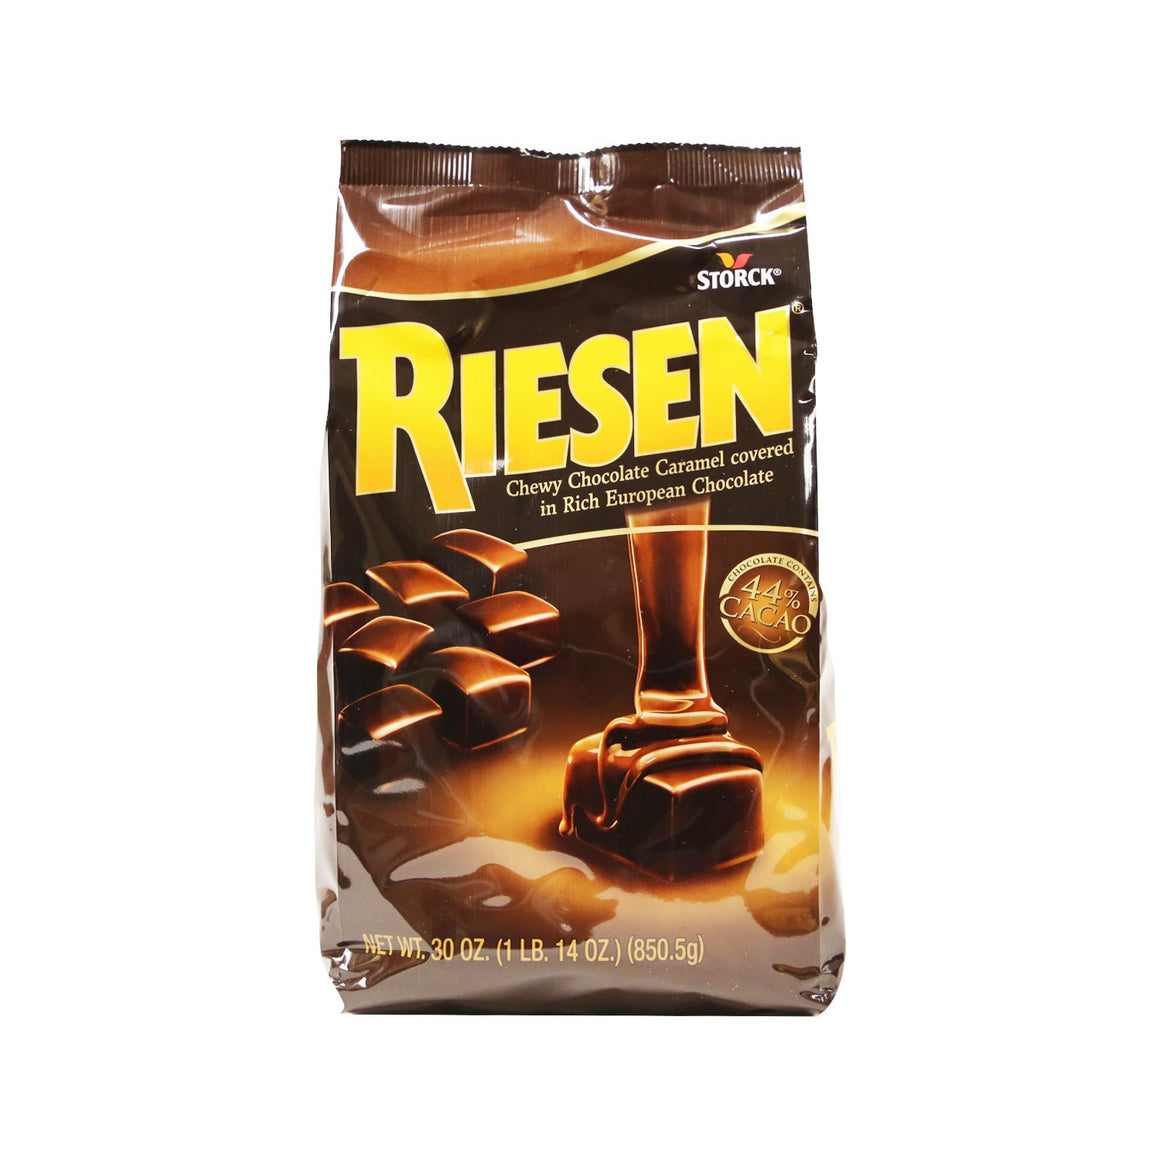 All City Candy Riesen Original 30 oz Bag Chocolate Storck For fresh candy and great service, visit www.allcitycandy.com